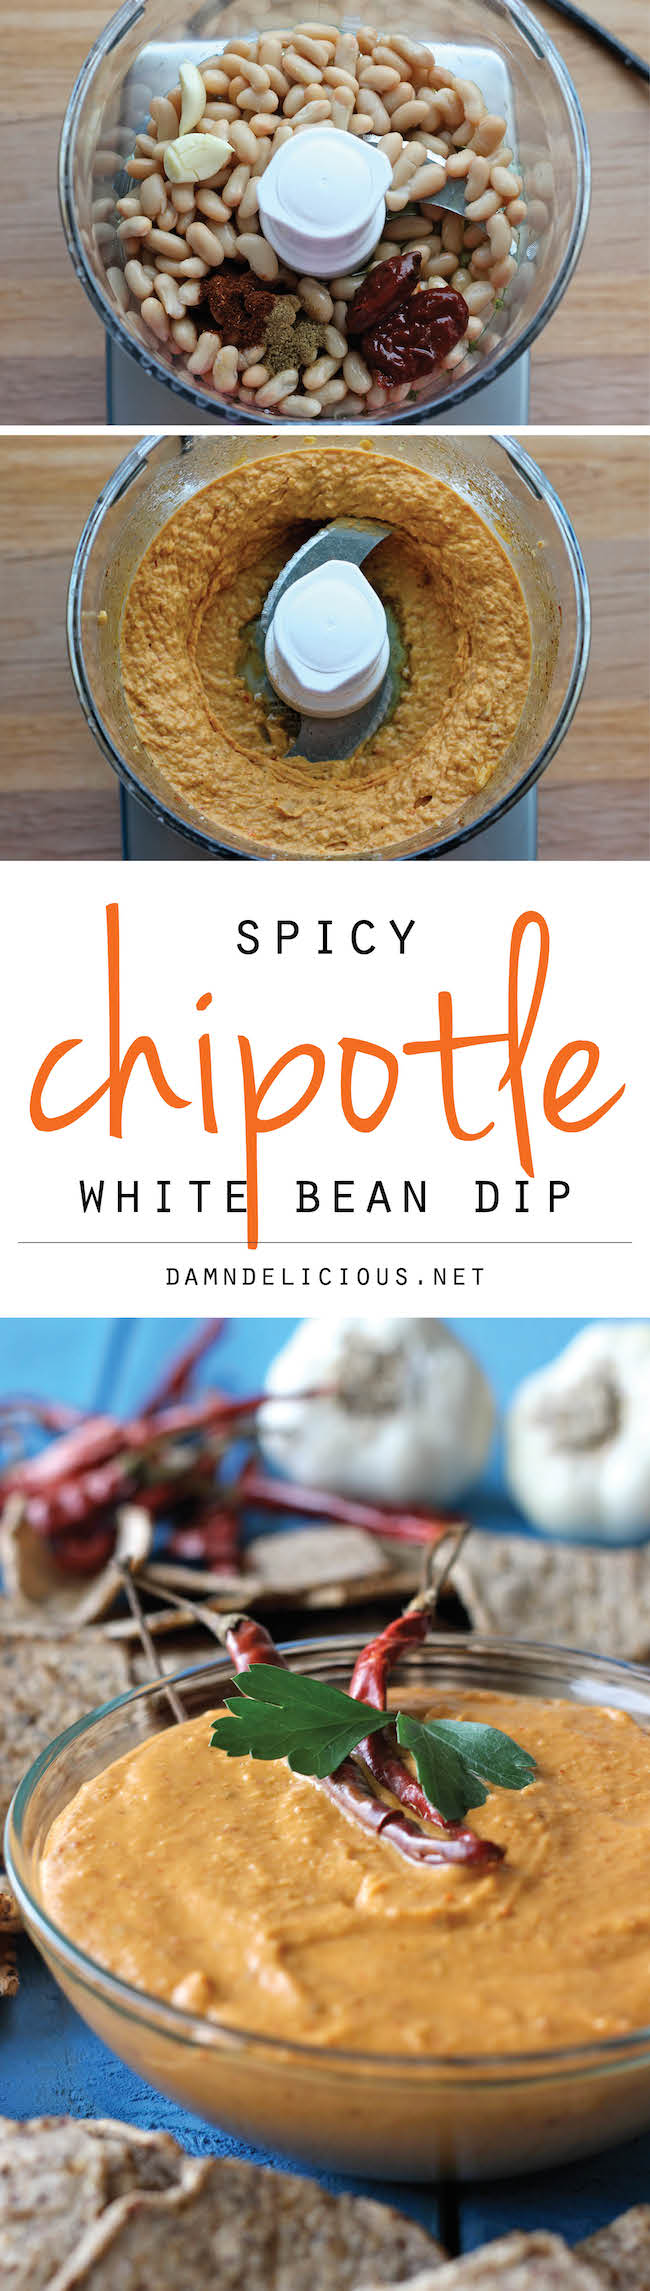 Spicy Chipotle White Bean Dip - A healthy bean dip with a spicy kick that you could easily make in the food processor in 5 minutes!